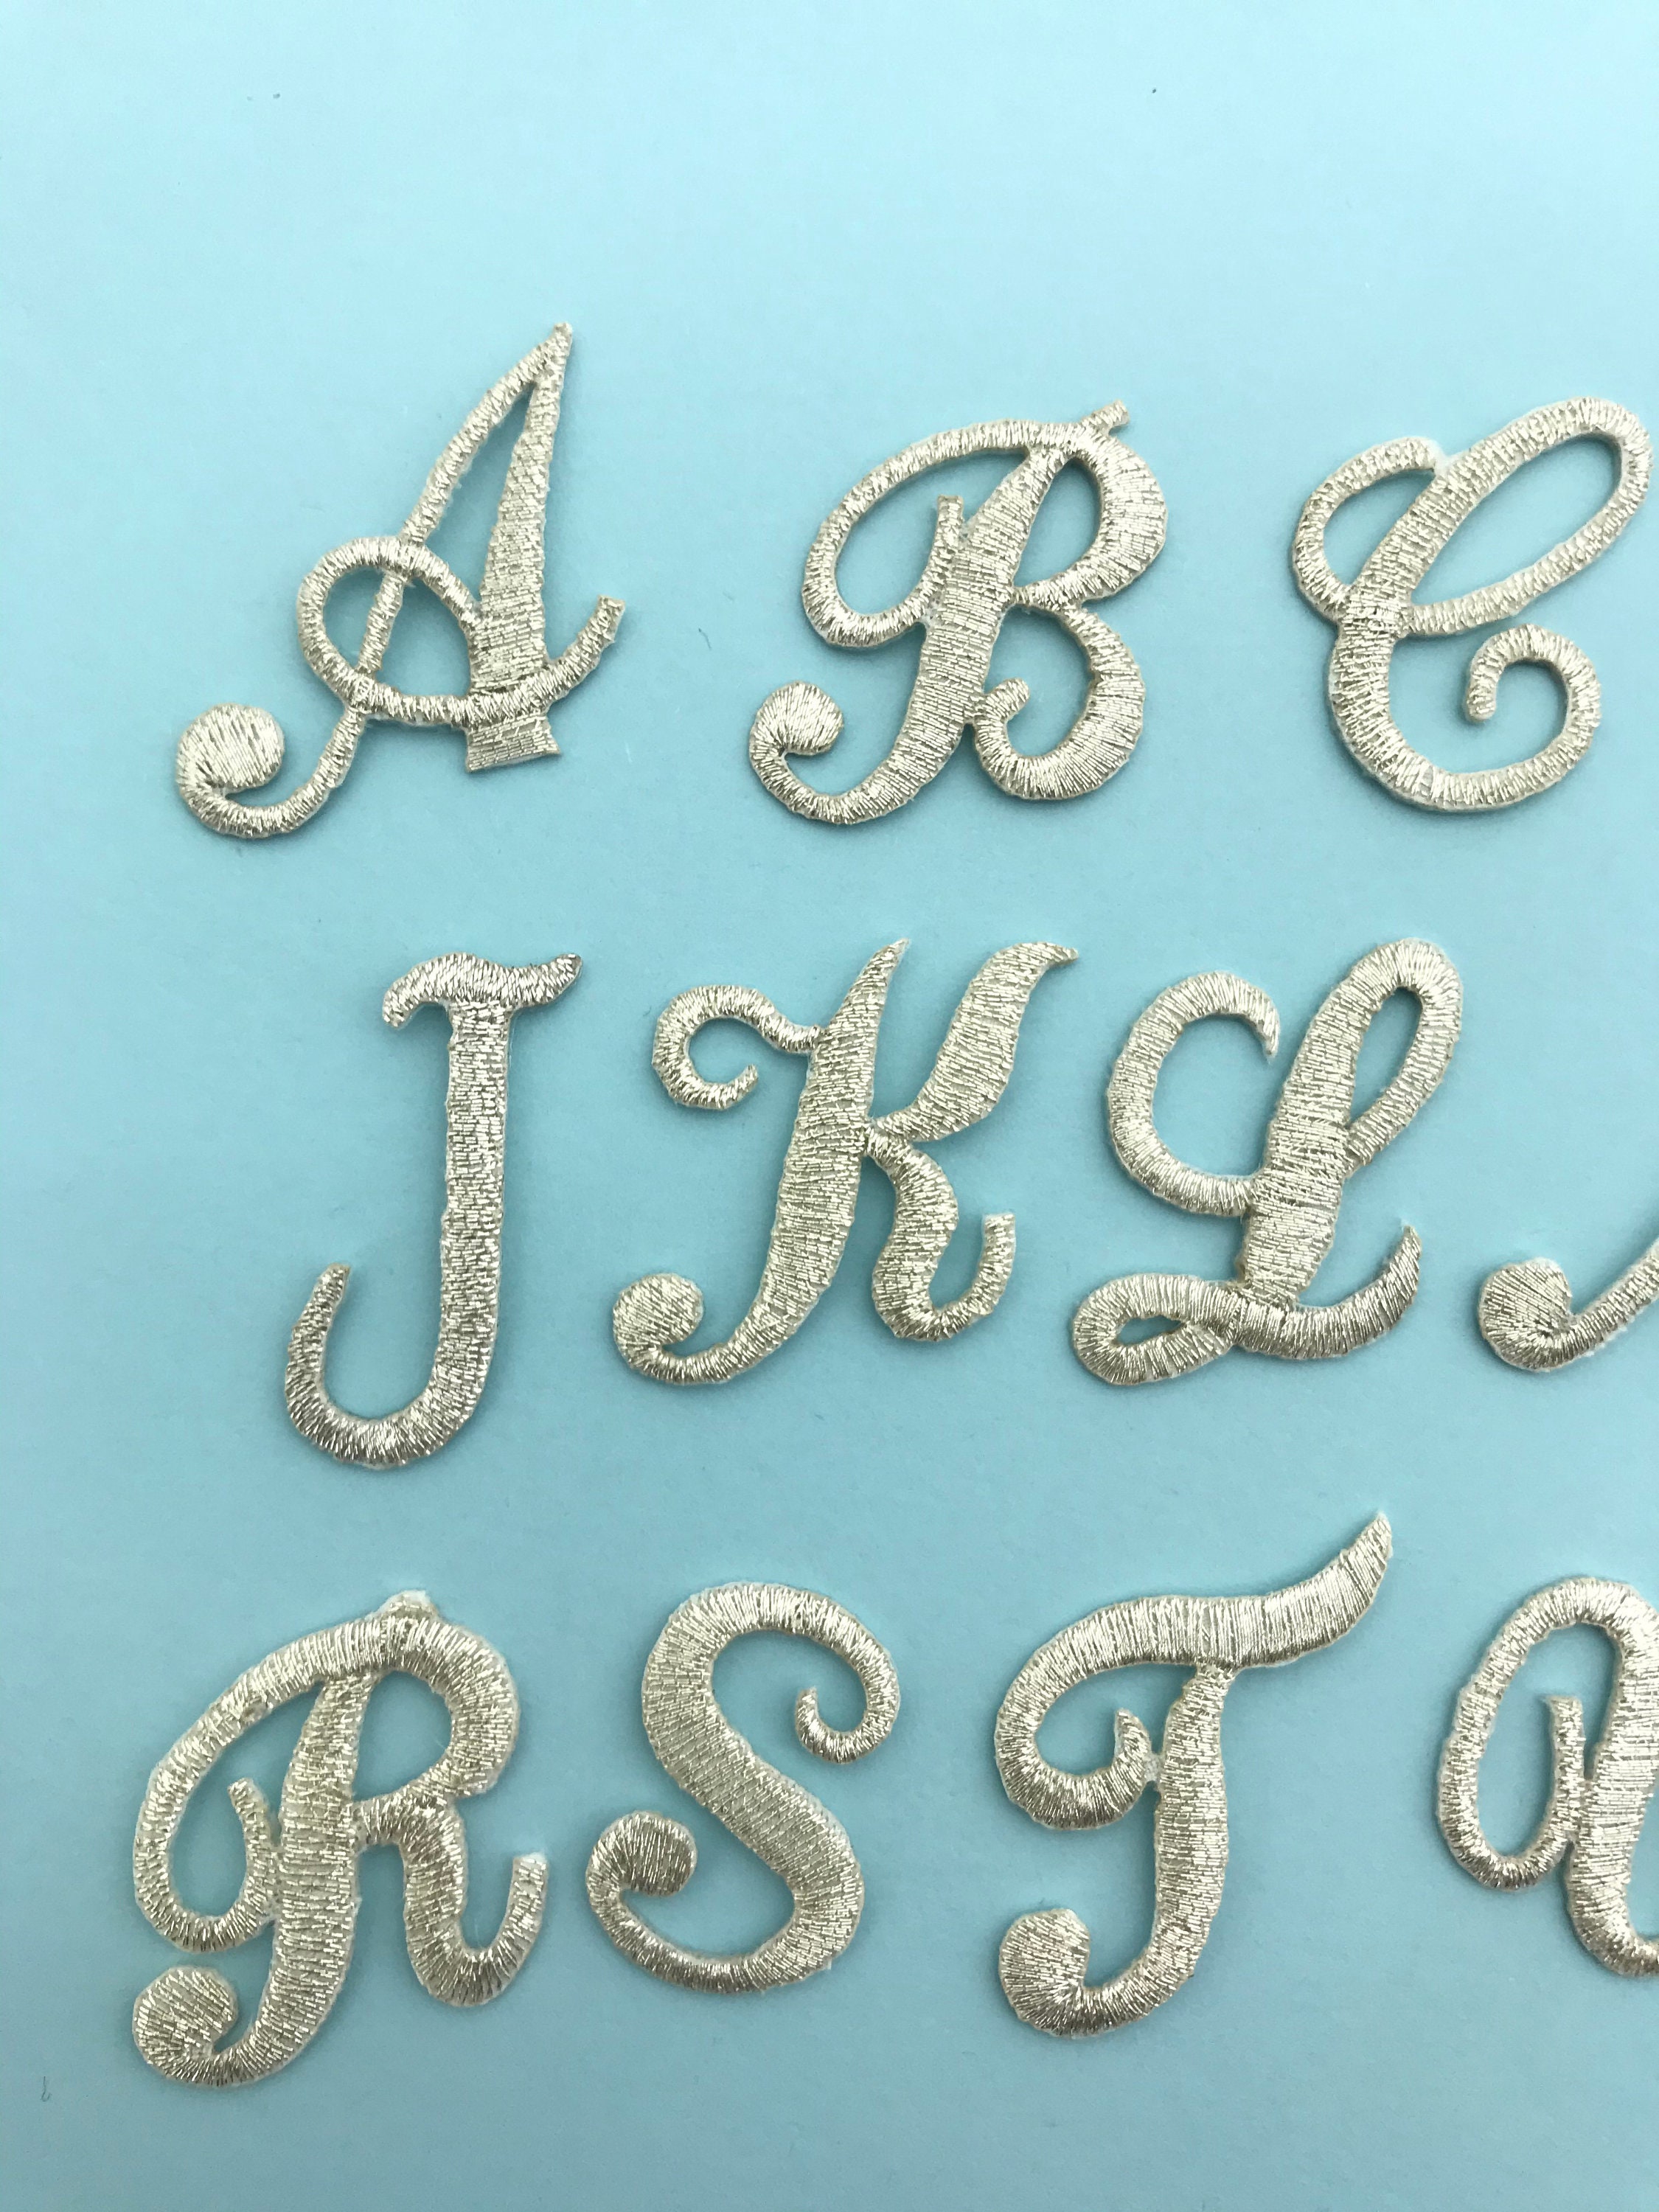 Iron on Embroidered Cursive Letters Silver Applique Craft Supplise Diy  Machine Embroidery 1 Inch Monogram Patch Alphabet for Name School. 